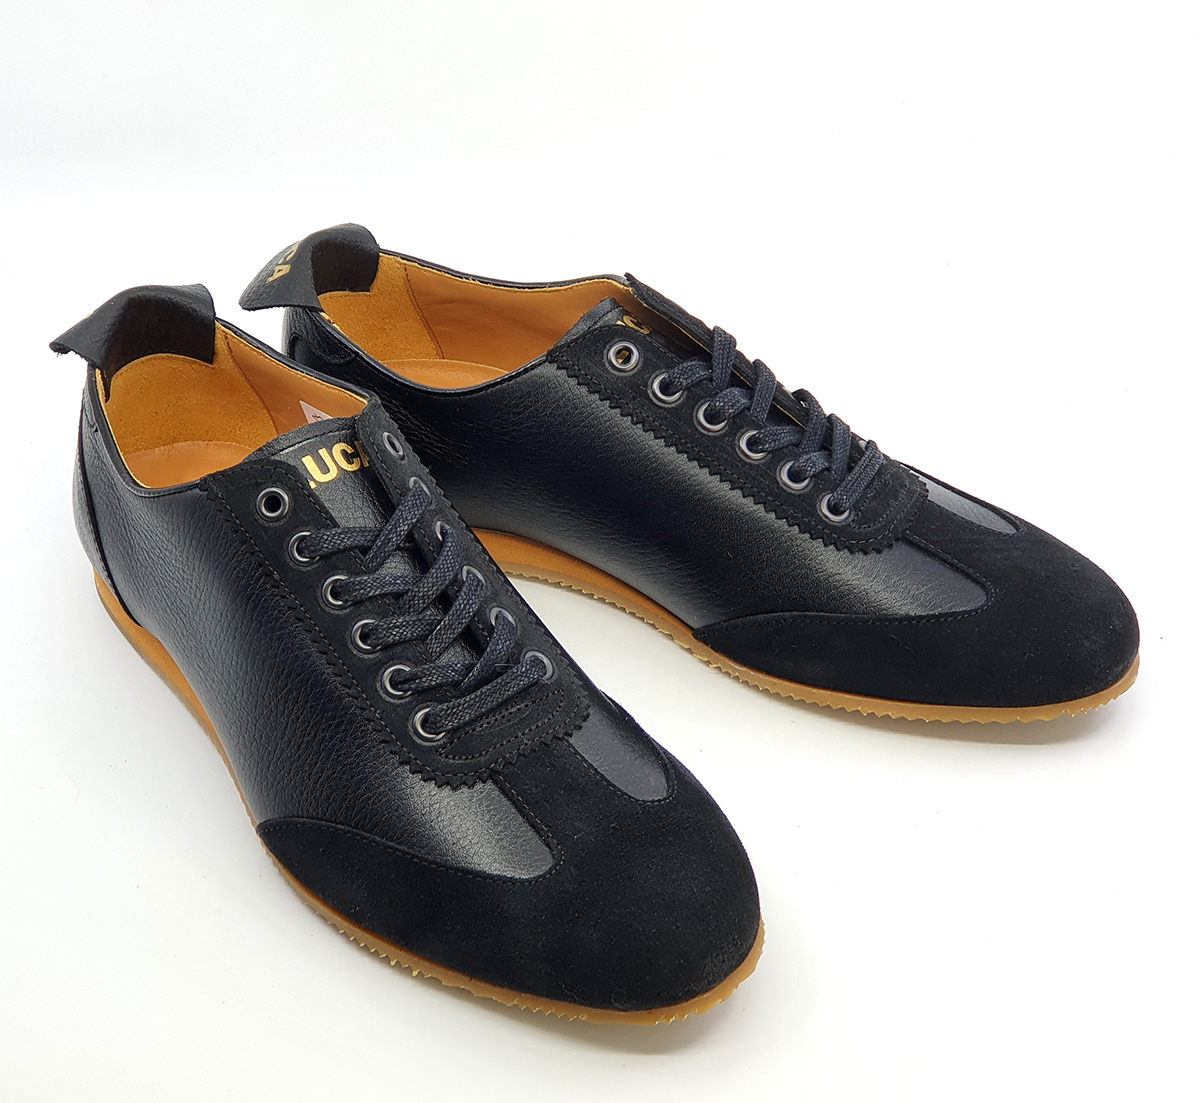 The Luca In Black Leather & Suede – Old School Trainers – Mod Shoes